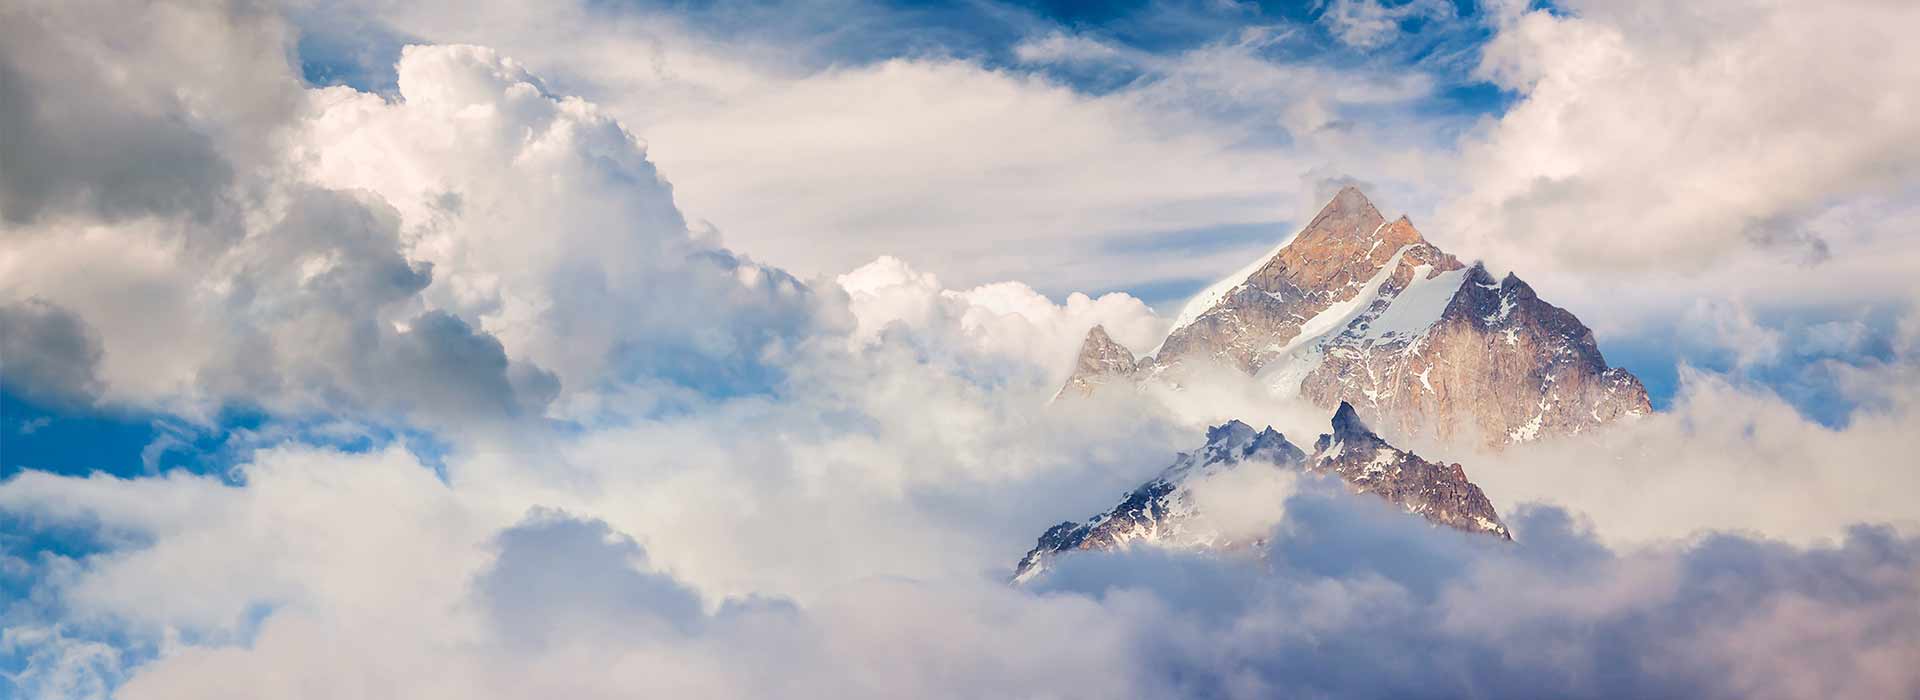 Snow-capped mountain peaks point through a cloud cover. In the background, you can see further cloudy sky.